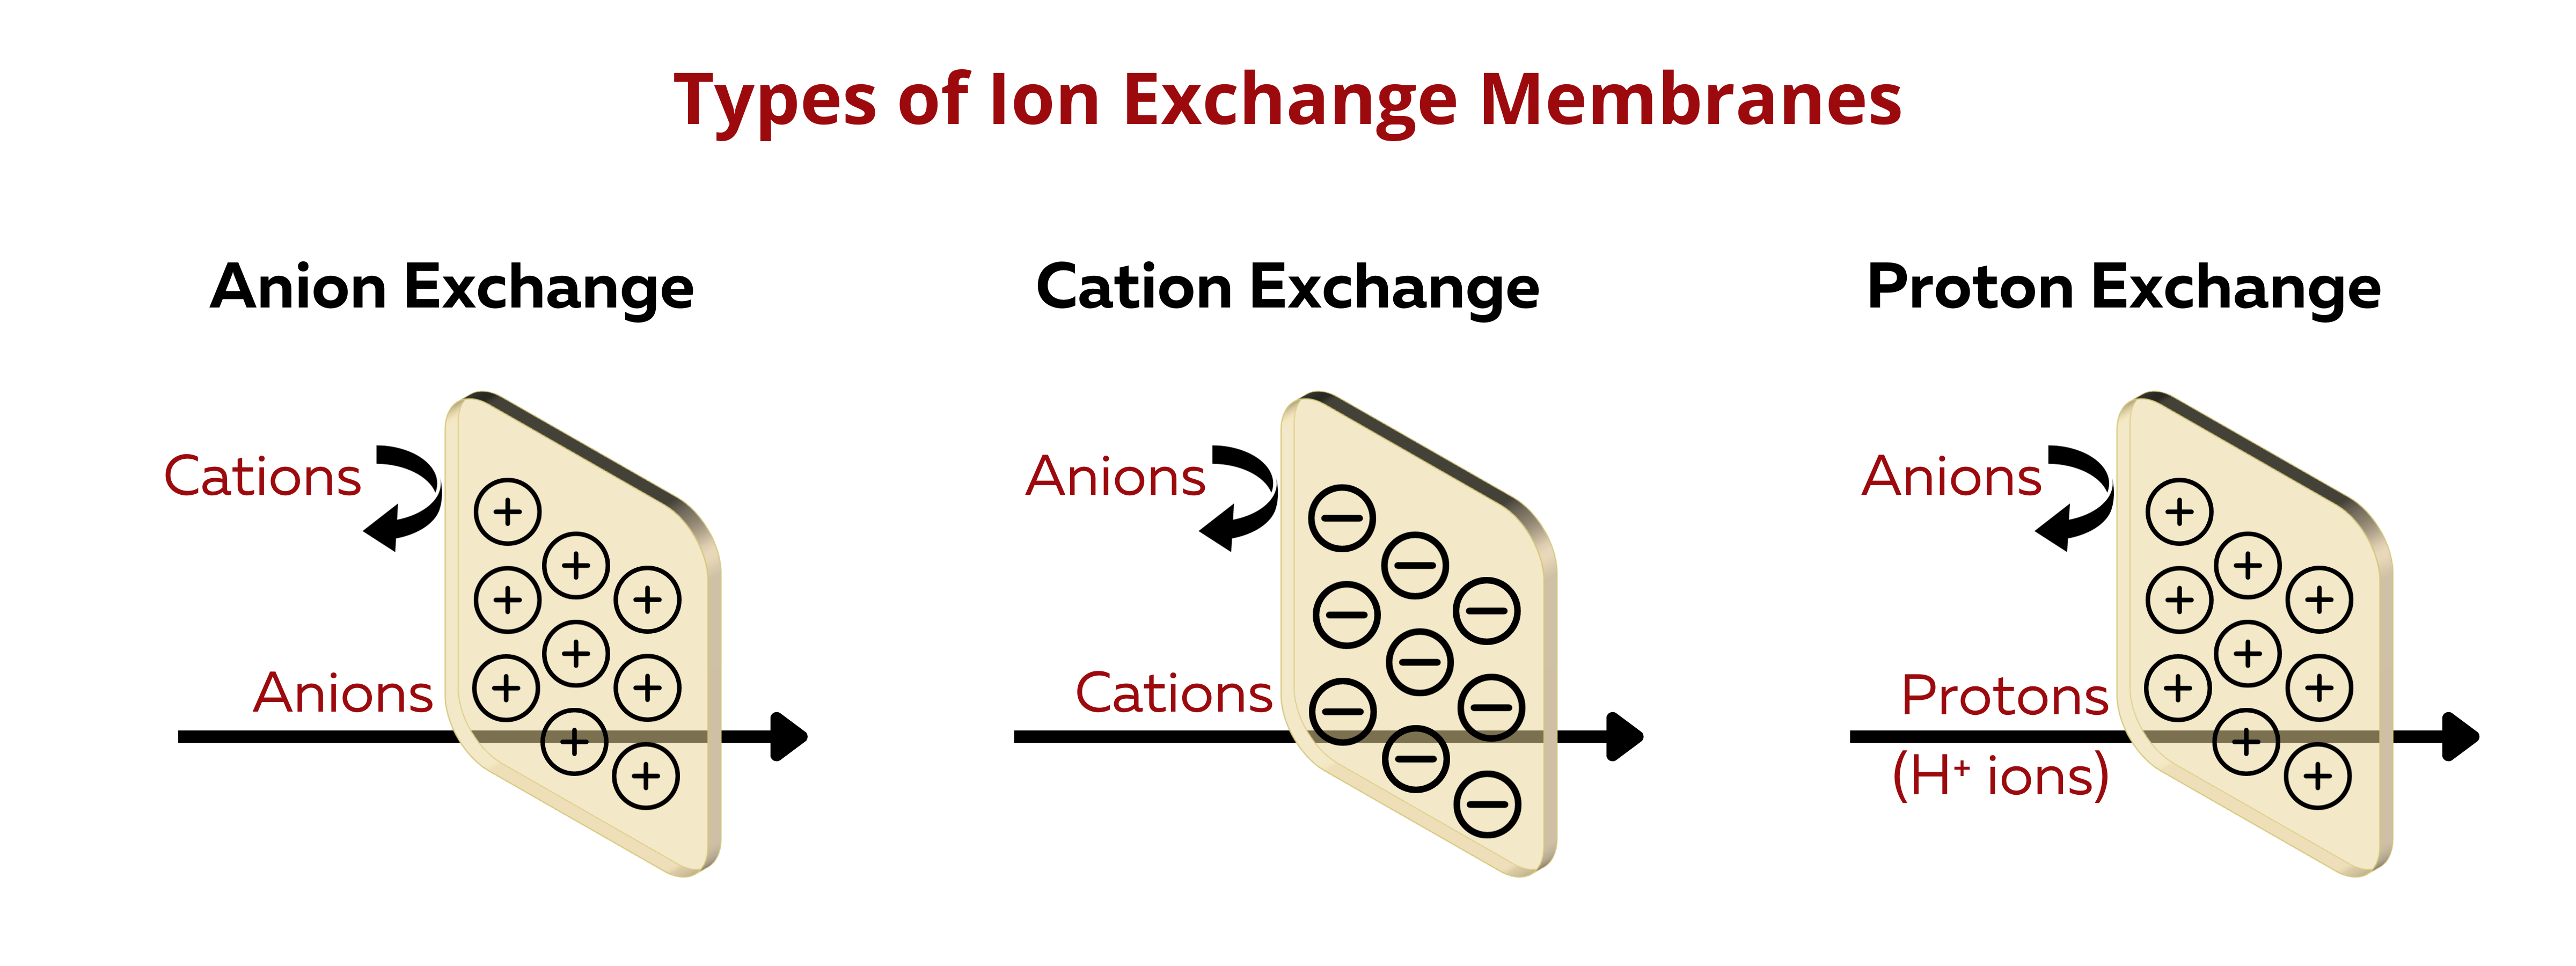 Types of Ion Exchange Membranes according to Ion-Exchange Functionality